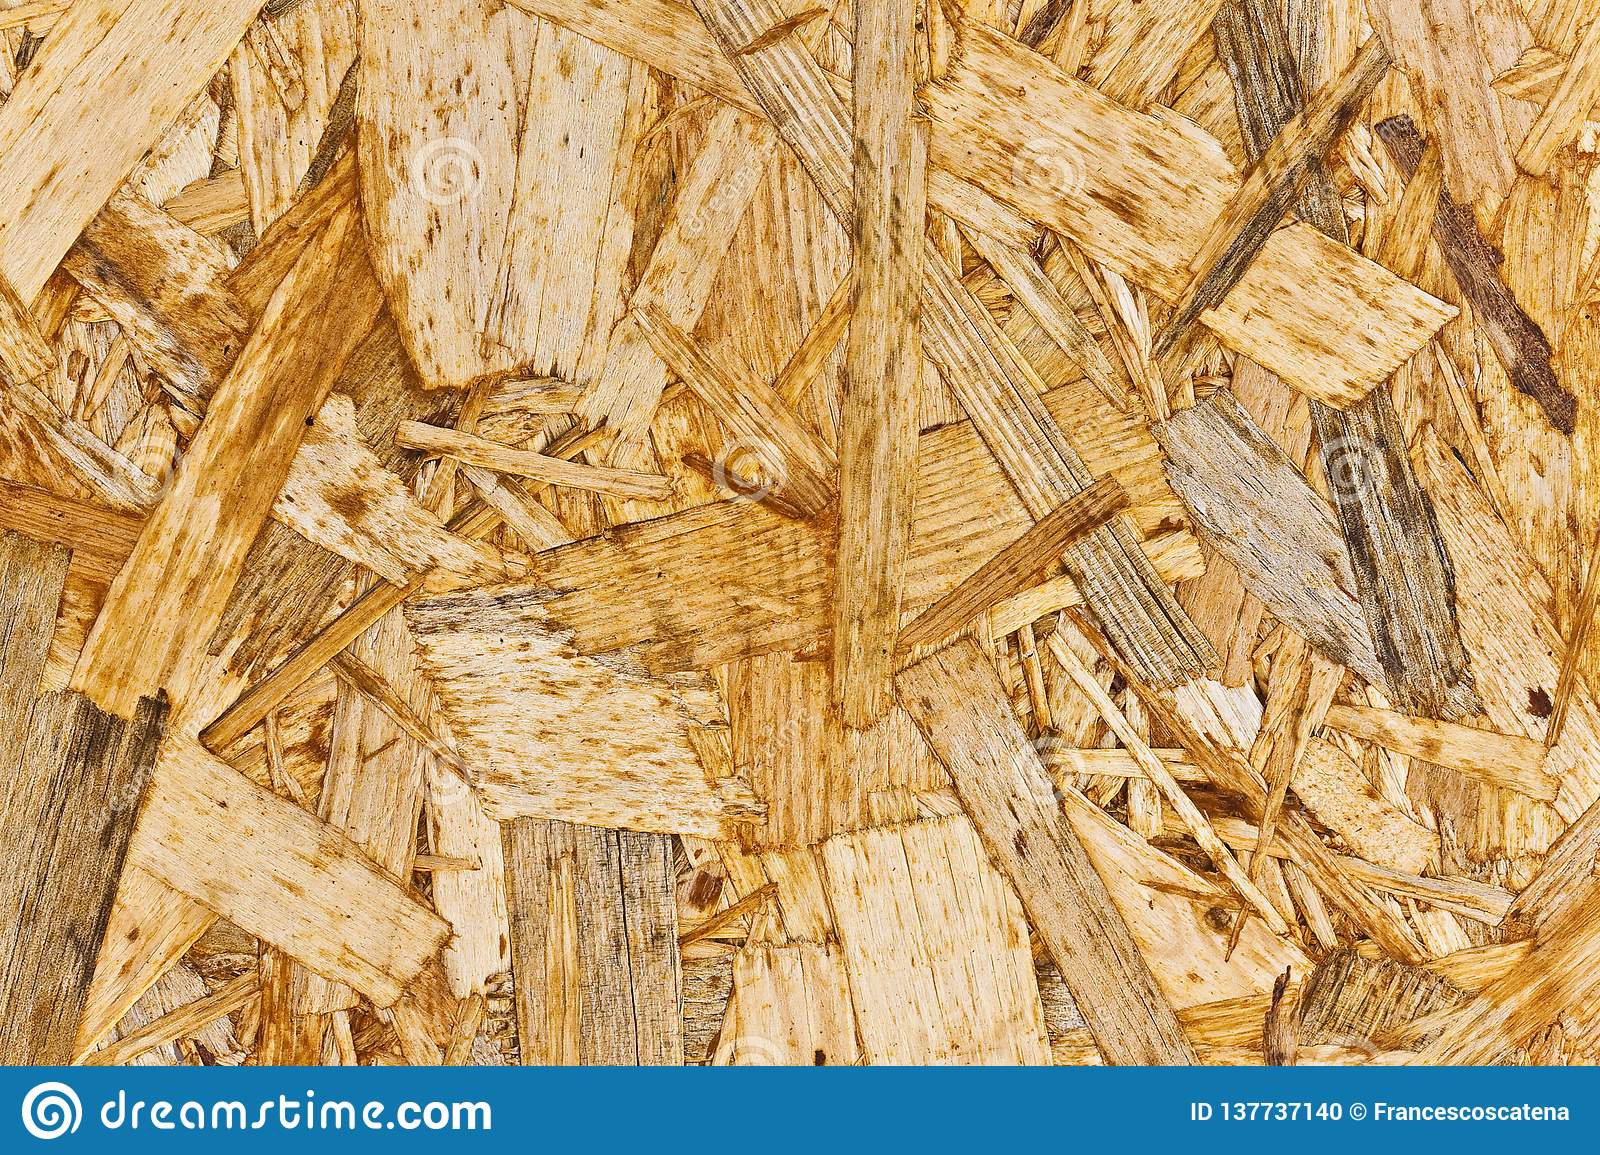 What is oriented strand board used for?